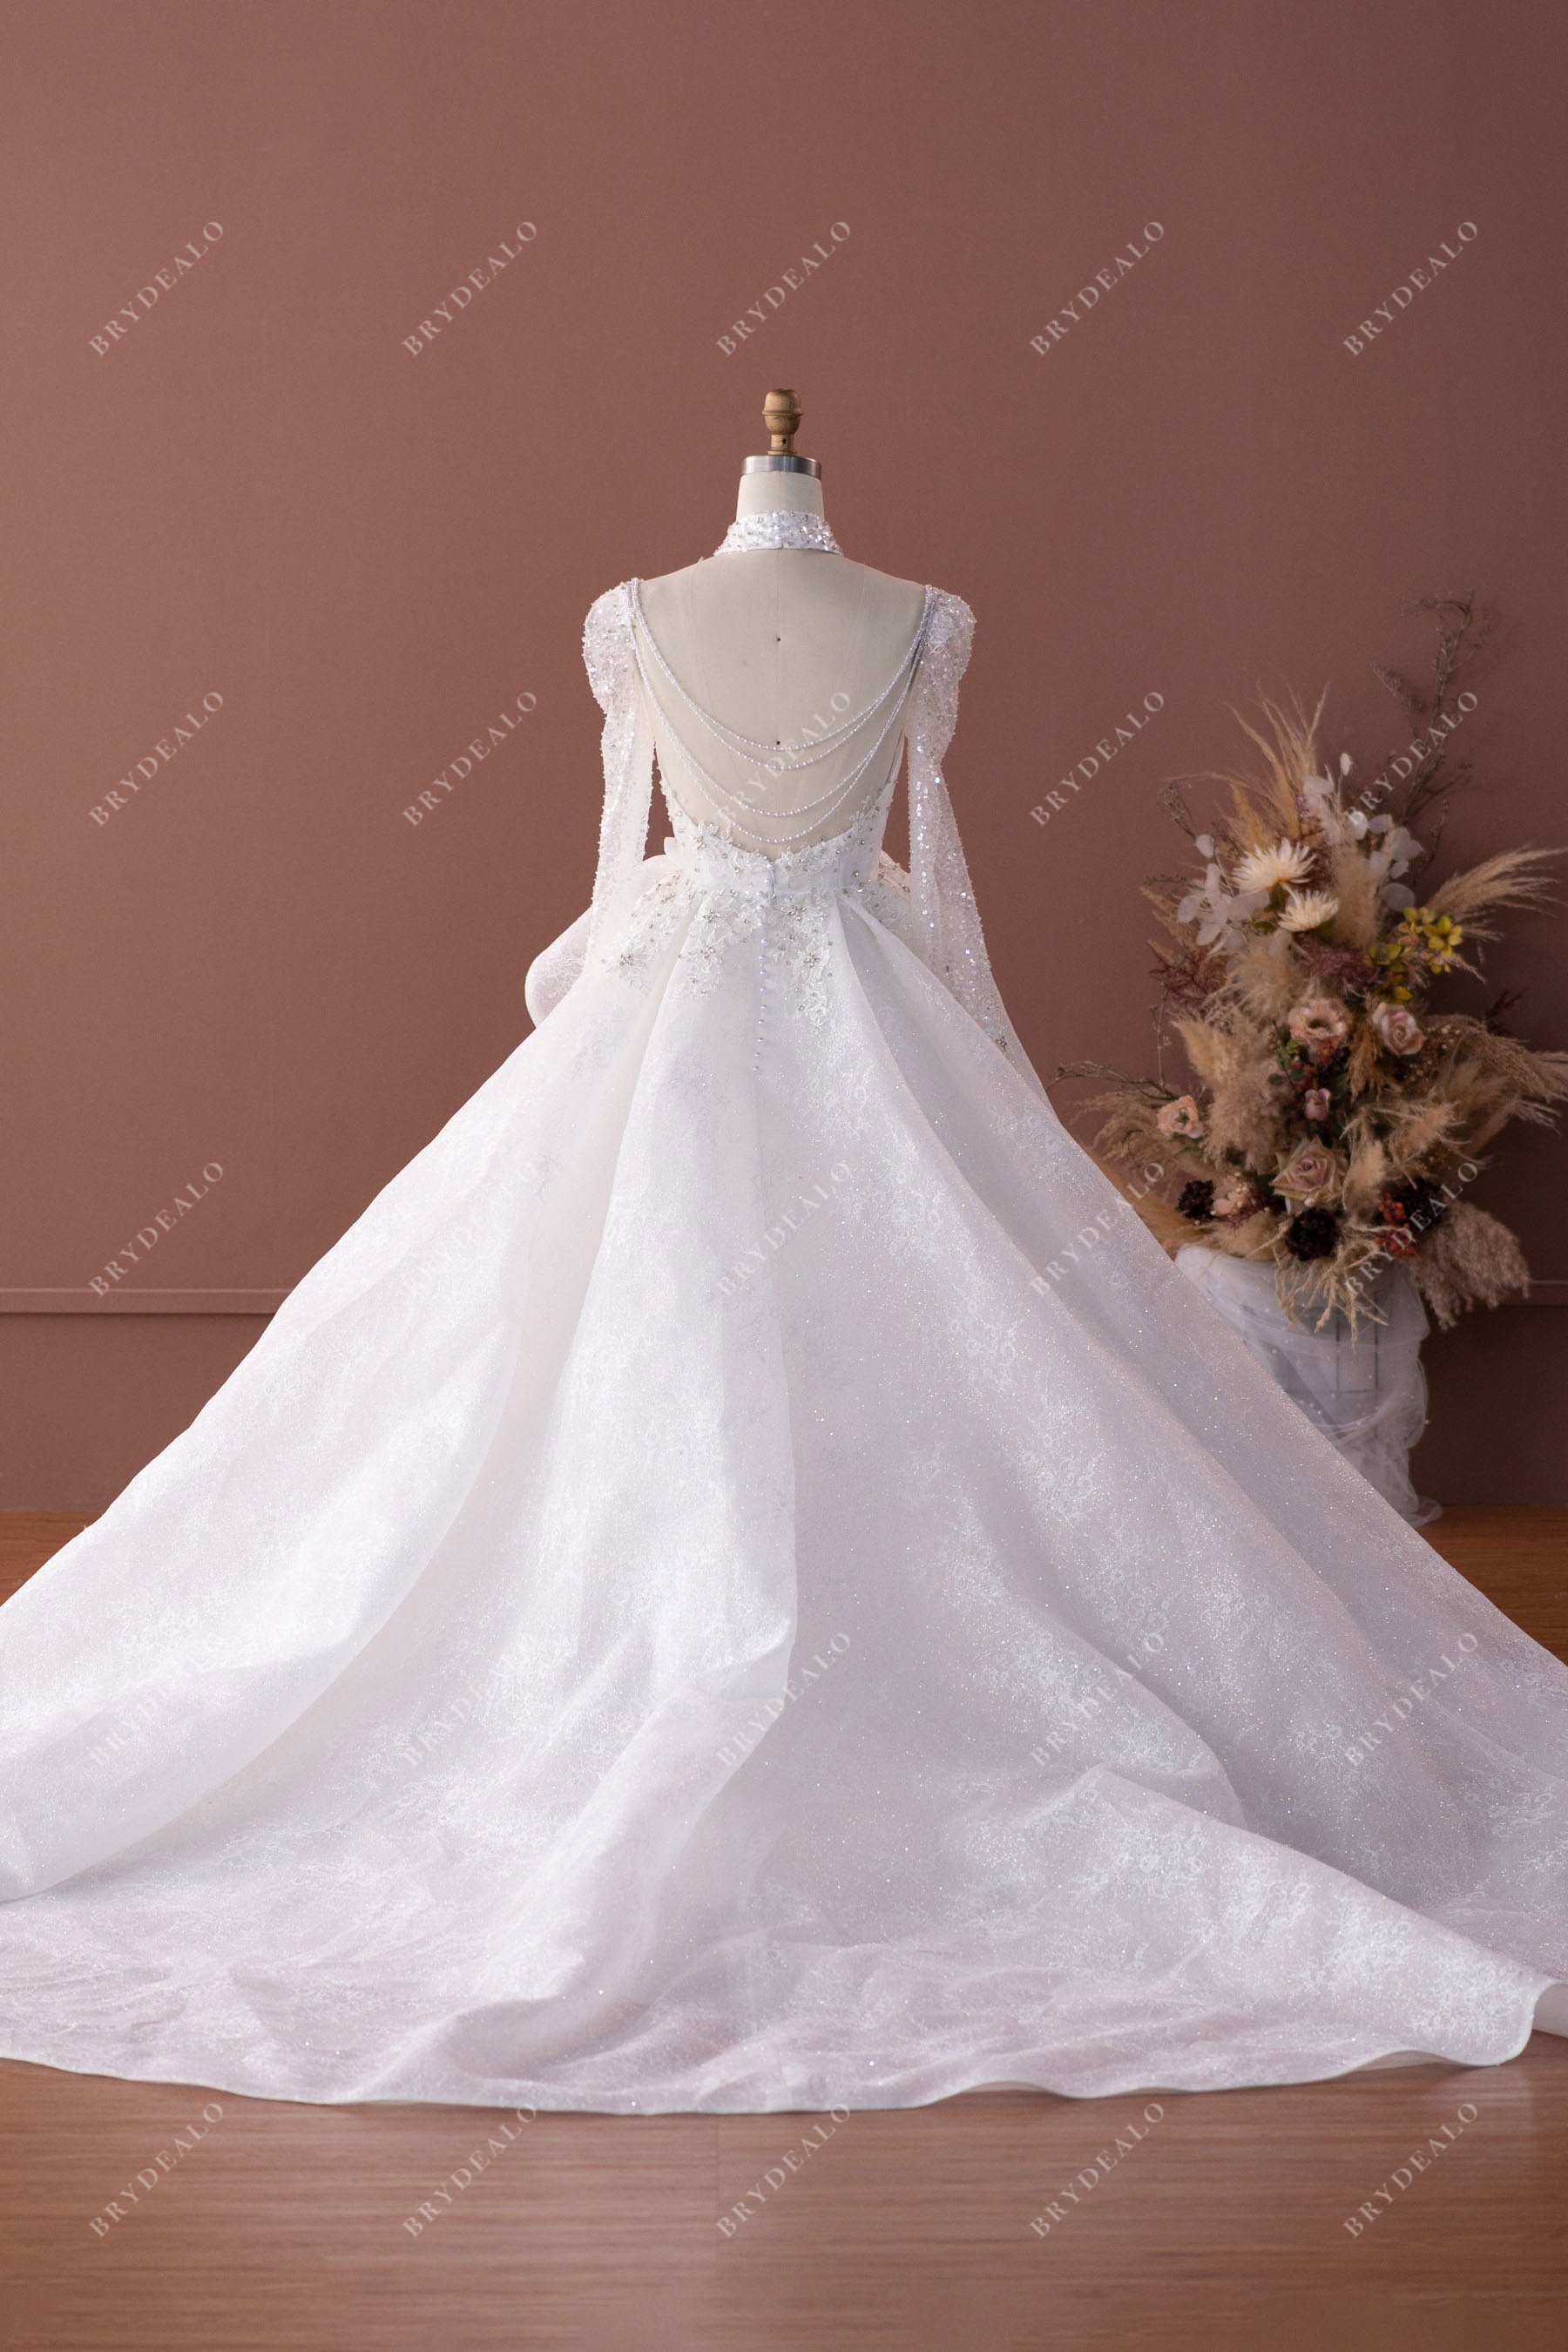 Luxury Sparkly Beaded Chains Ballgown Wedding Dress with Detachable Overskirt